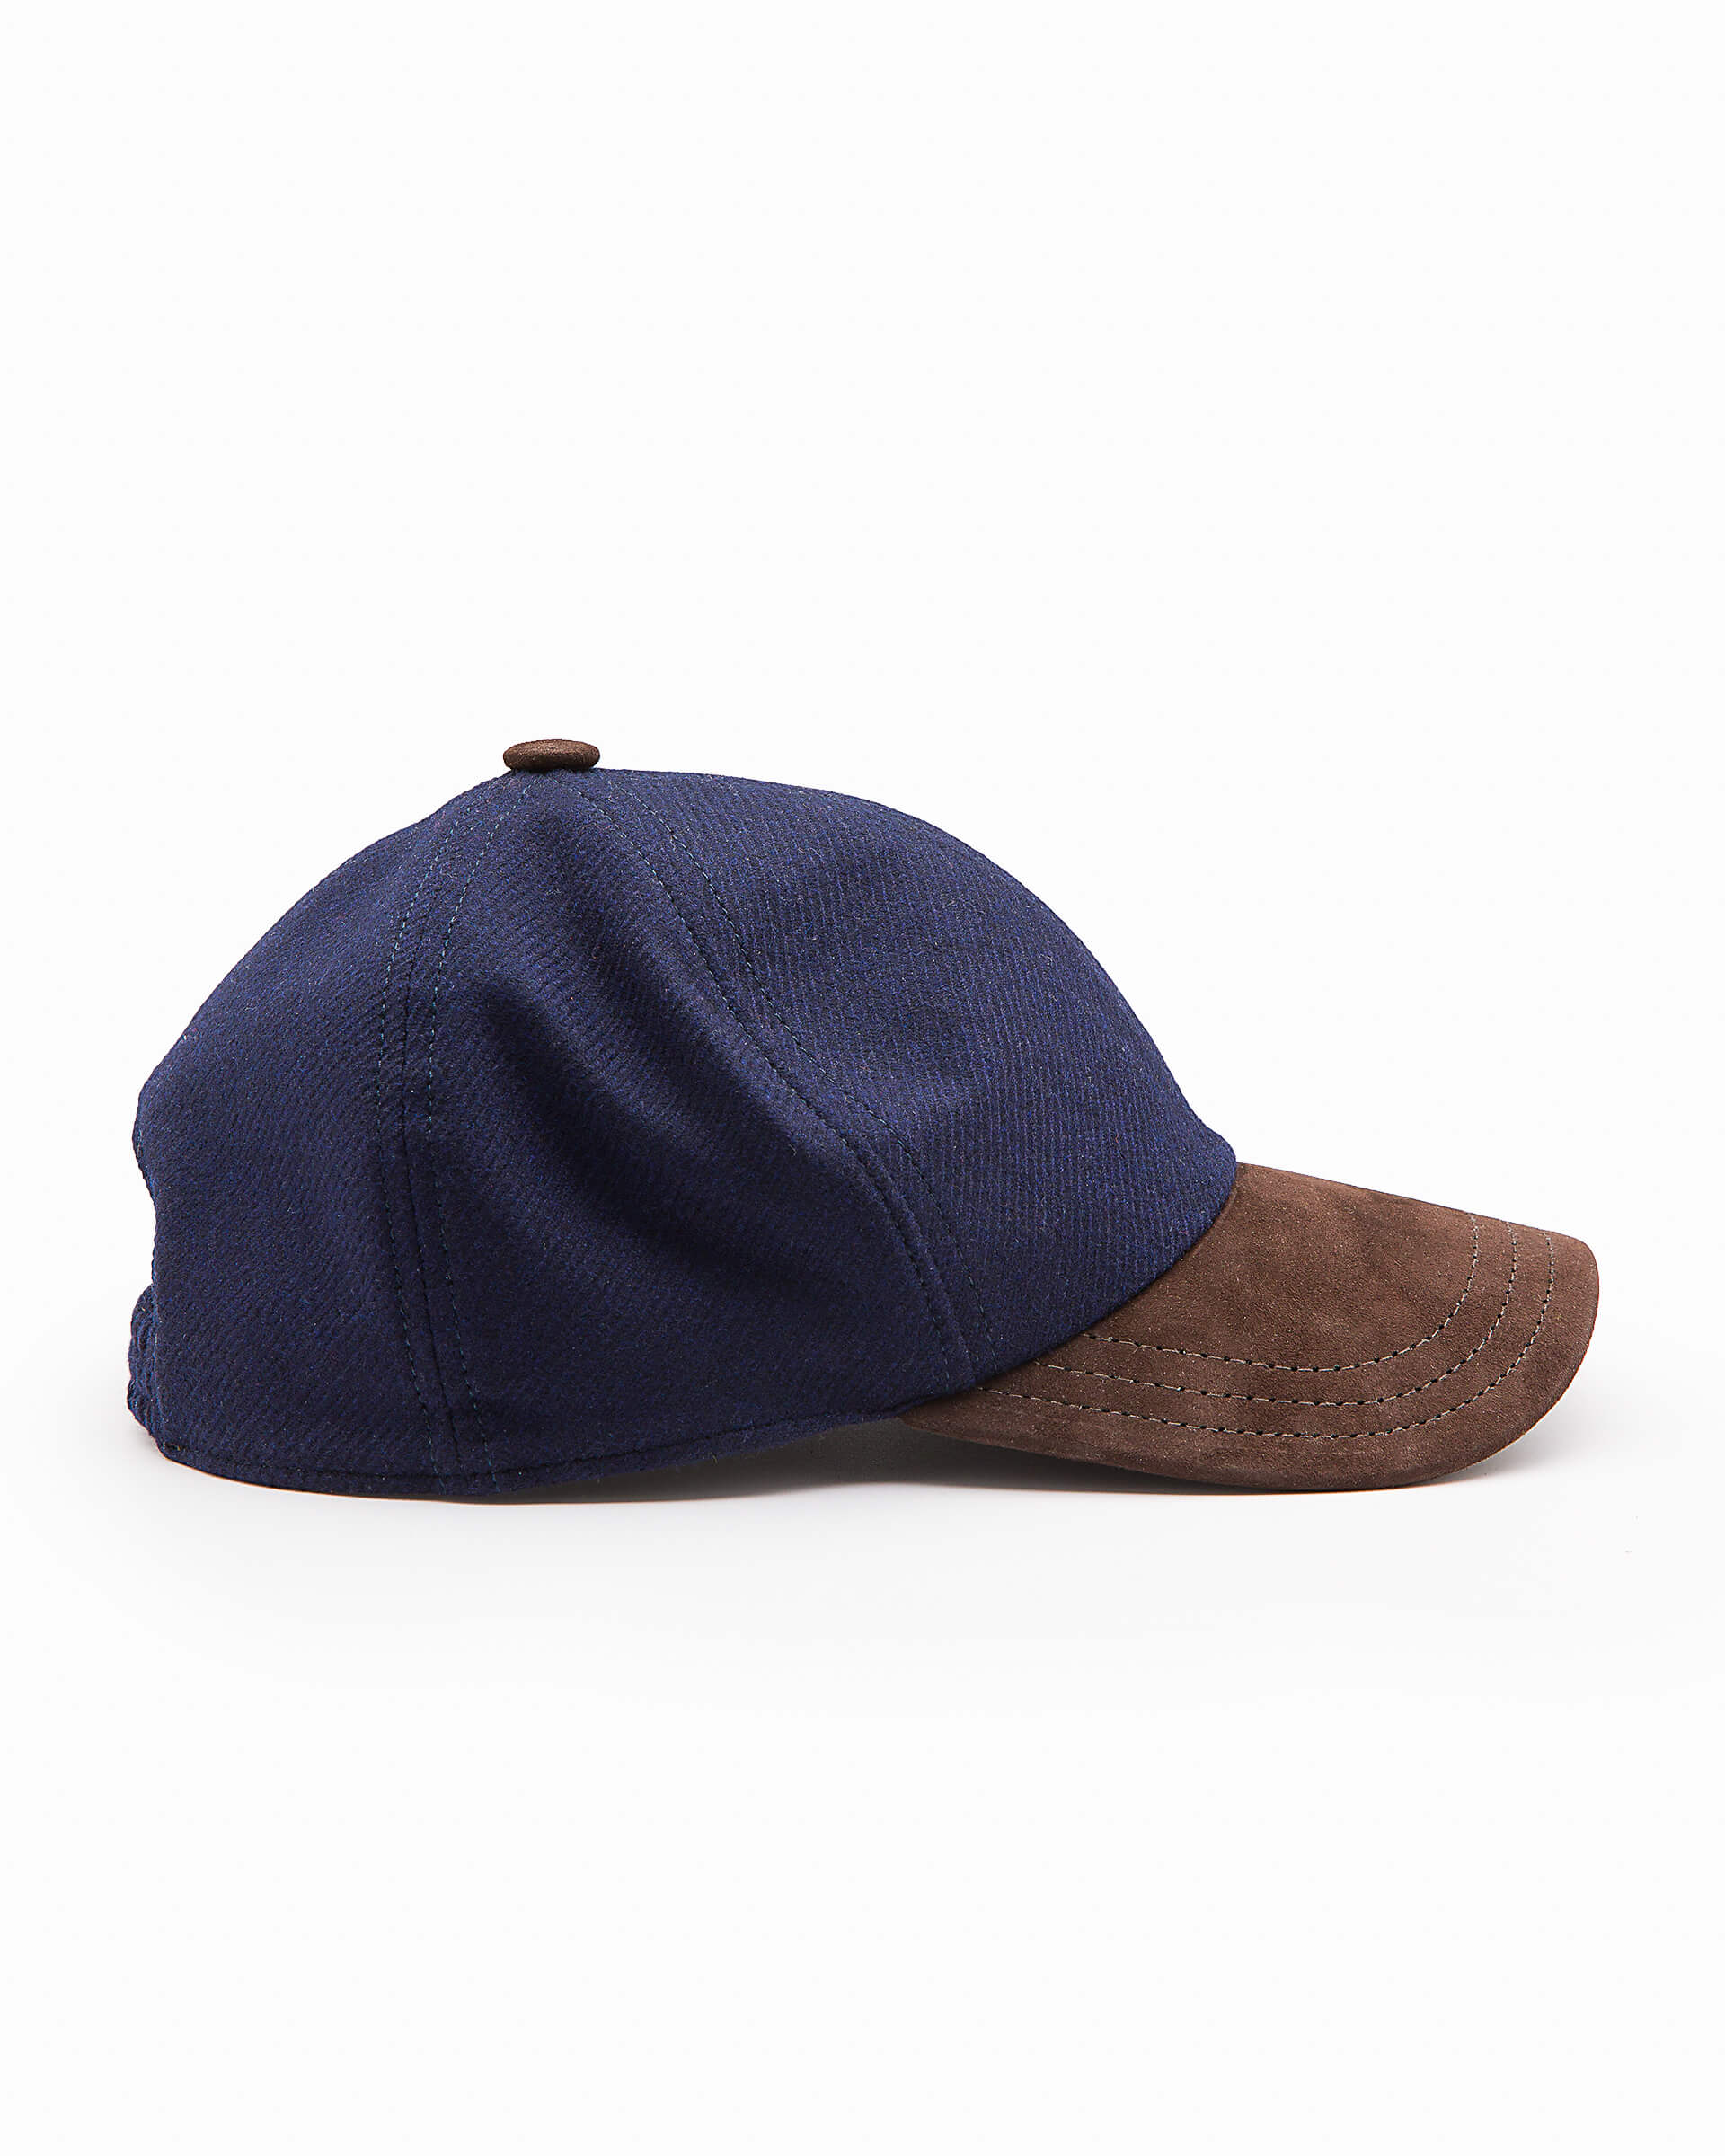 Baseball cap made - visor Andrea eclipse Ventura blue cashmere of water-repellent Firenze hat with